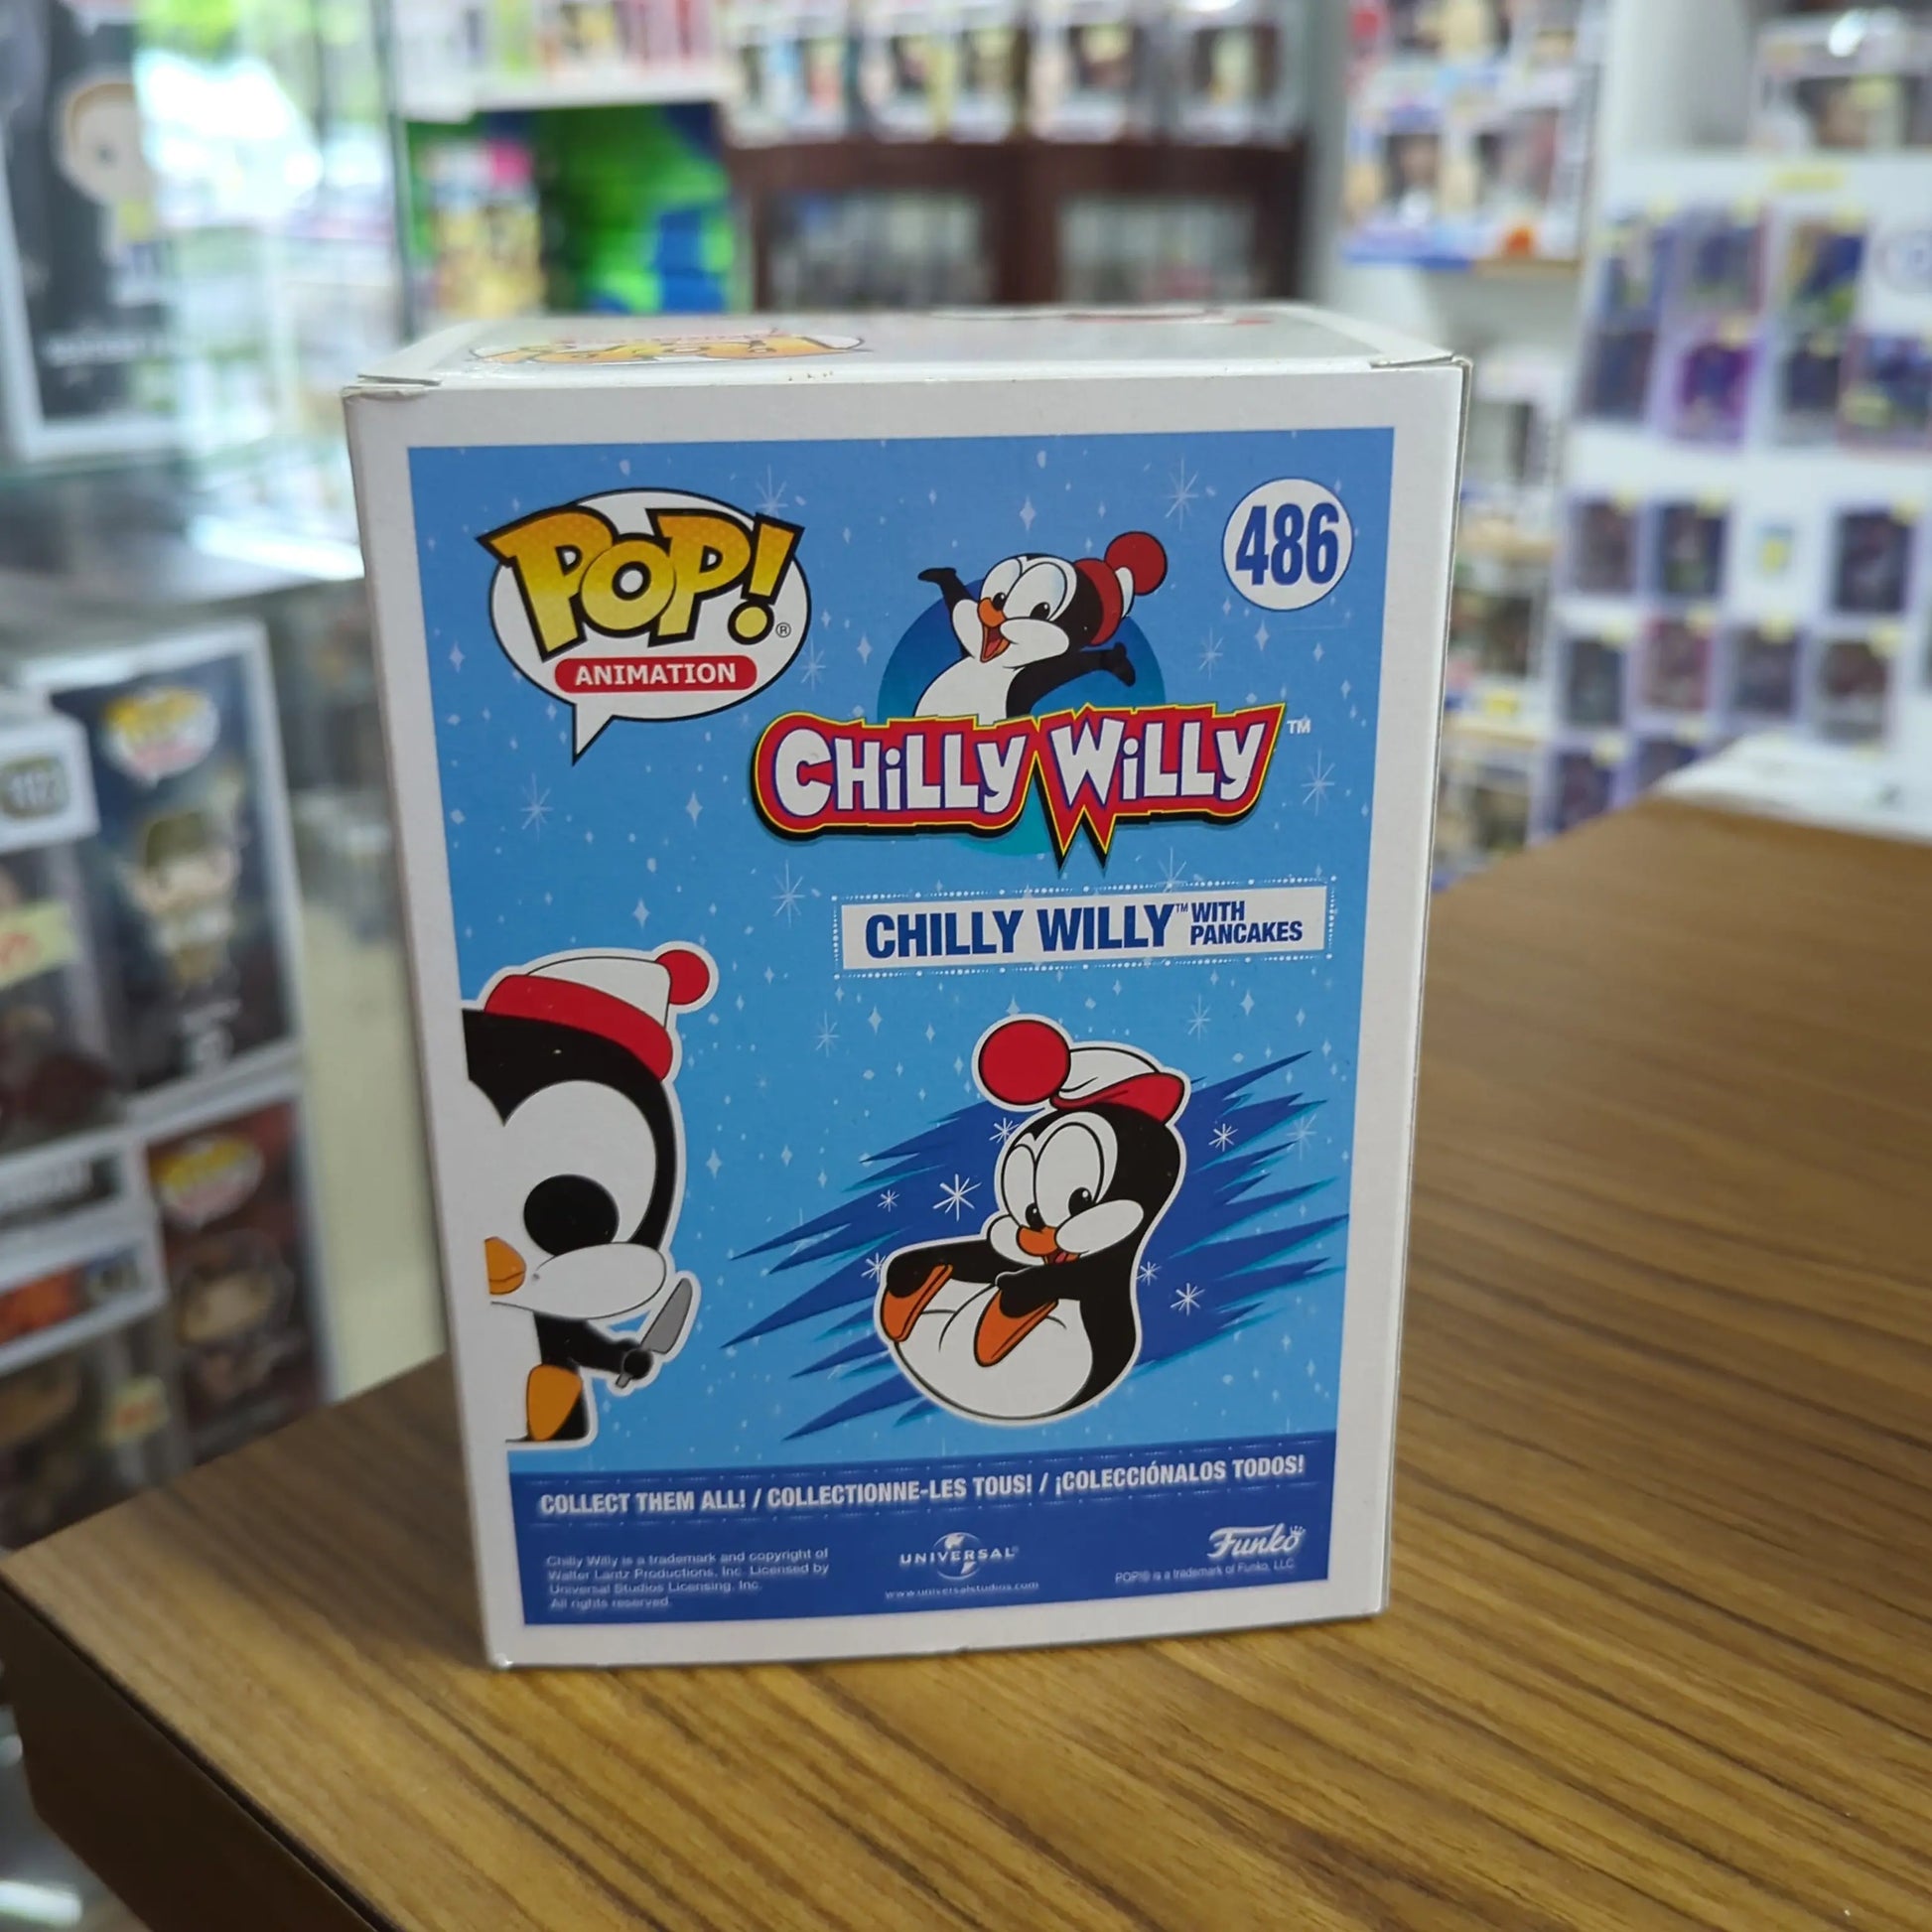 Funko Pop Chilly Willy With Pancakes 486 Animation Penguin Vinyl Figure FRENLY BRICKS - Open 7 Days